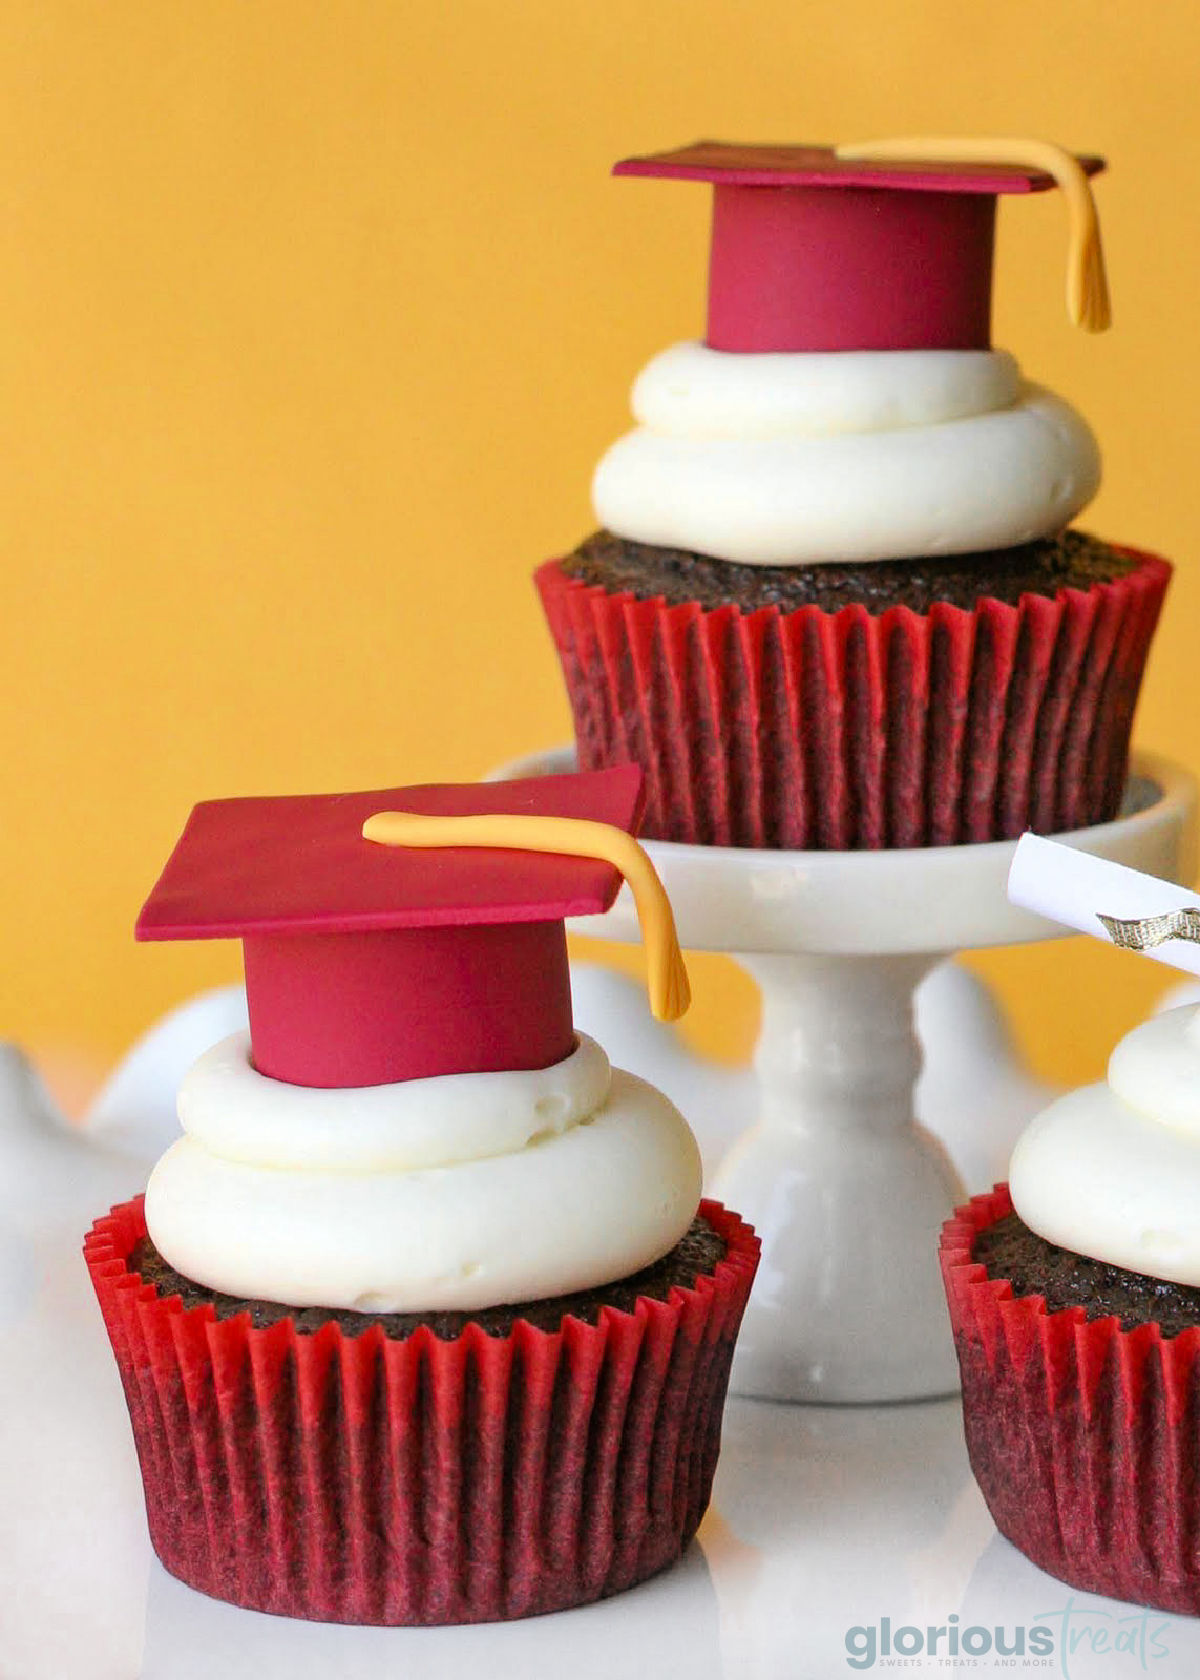 Close up of three cupcakes topped with graduation caps and tassels made with fondant. Cupcakes are in red liners.